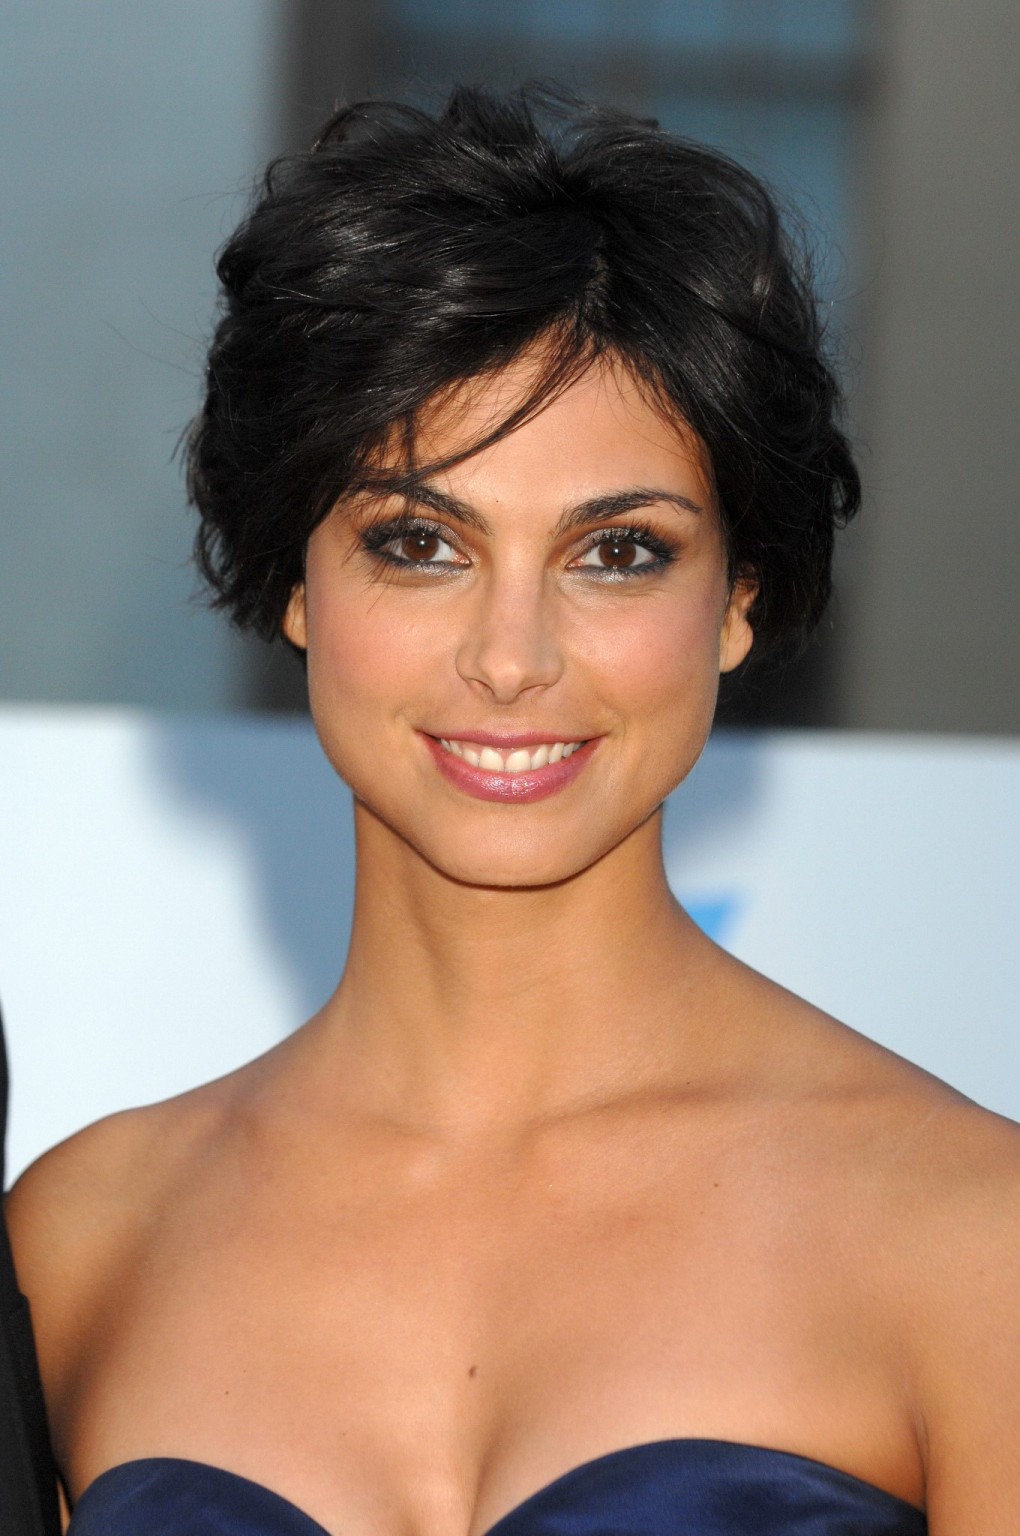 Morena Baccarin shows cleavage wearing a strapless dress at the Israel Film Fest #75269998